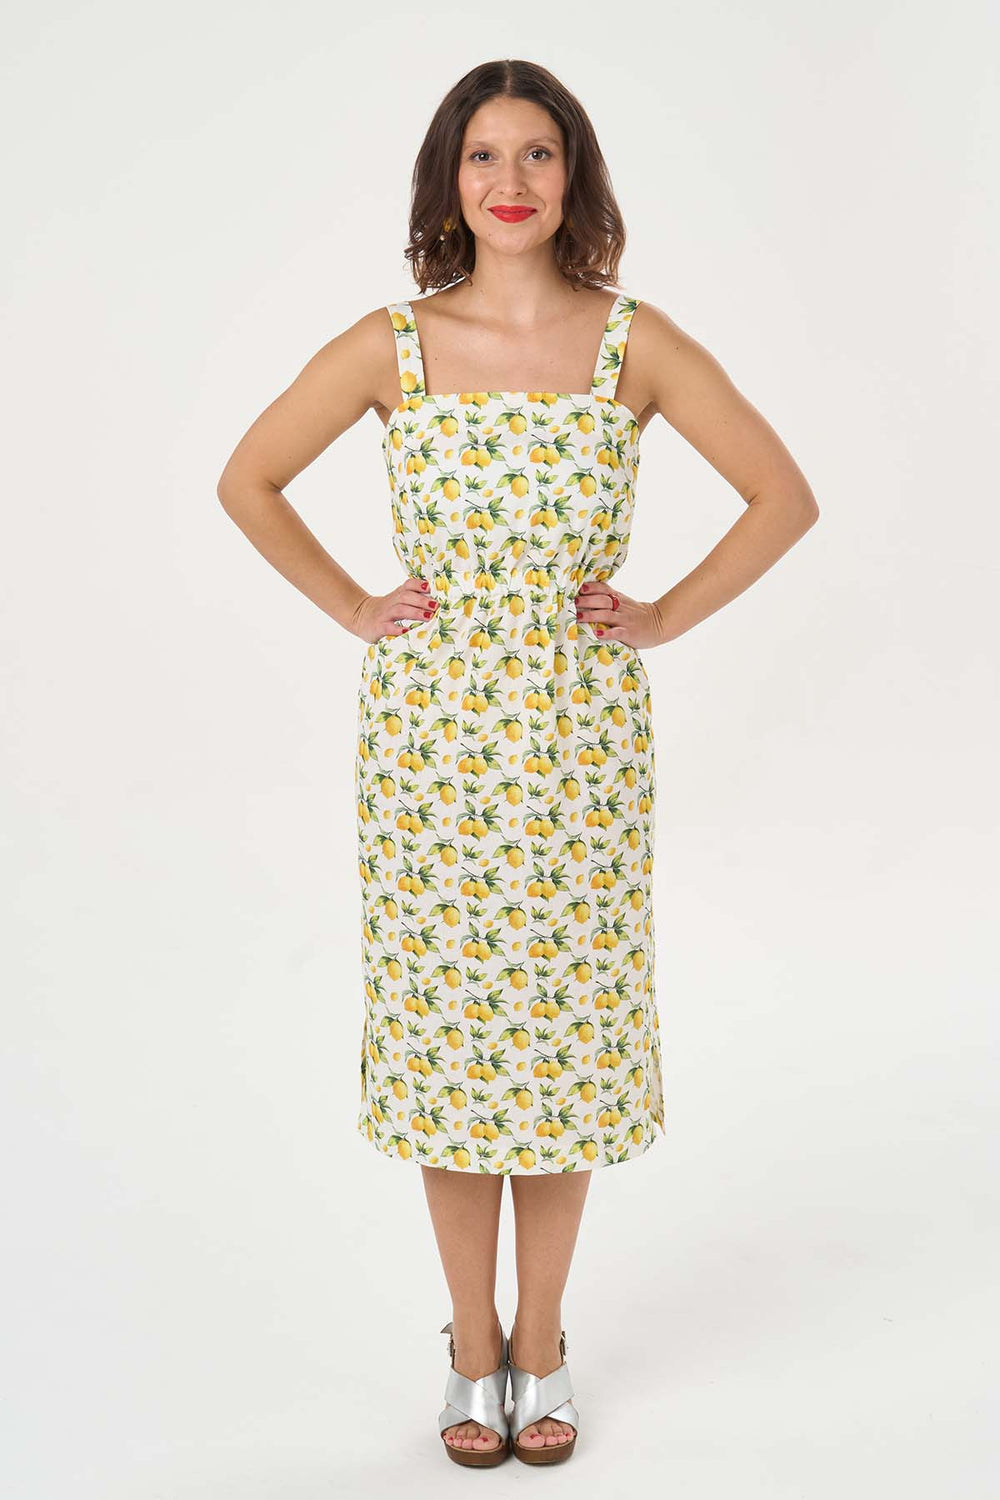 Women wearing the Oona Dress sewing pattern from Sew Over It on The Fold Line. A sleeveless dress pattern made in cotton, cotton poplin, viscose, rayon, chambray, linen, linen crepe or crepe fabrics, featuring wide bra-concealing straps, no closures, wide